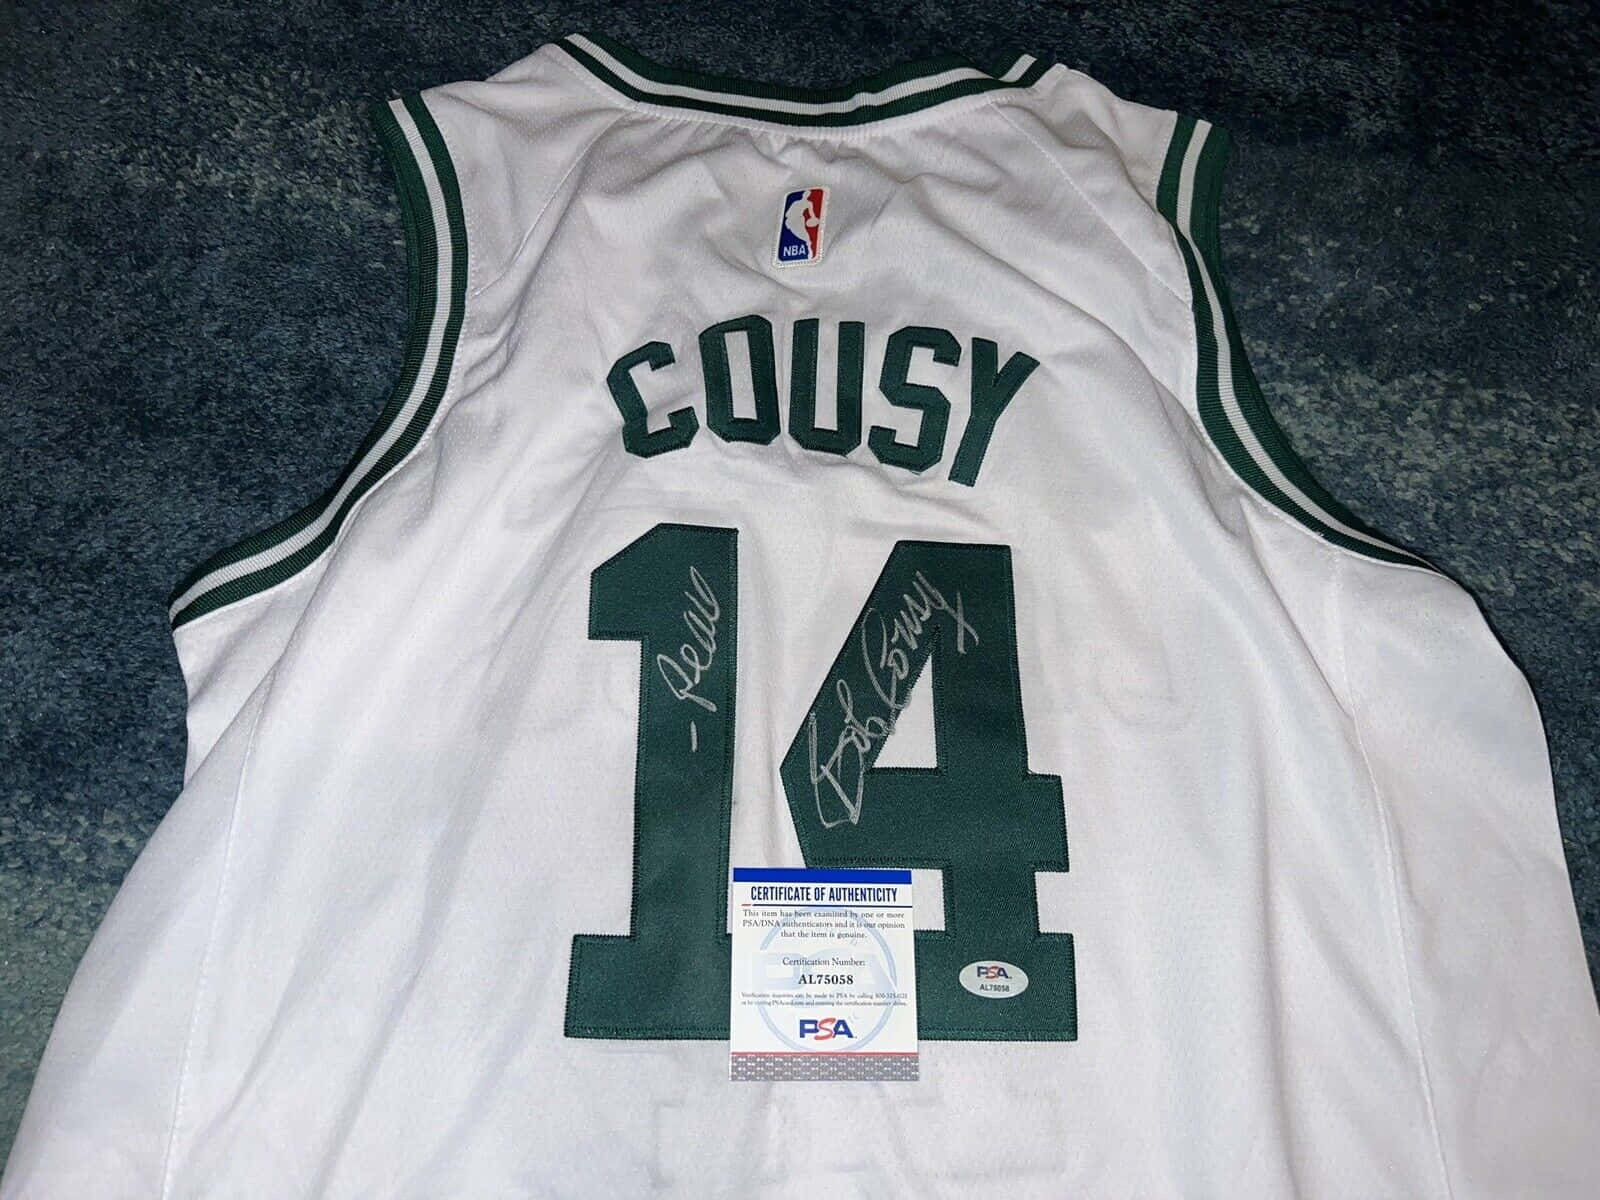 Bobcousy Nba Team Jersey Is Not A Sentence, But Rather A Product Description. However, If You'd Like A Translation Related To Computer Or Mobile Wallpapers, Please Provide A Specific Sentence Or Phrase. Wallpaper